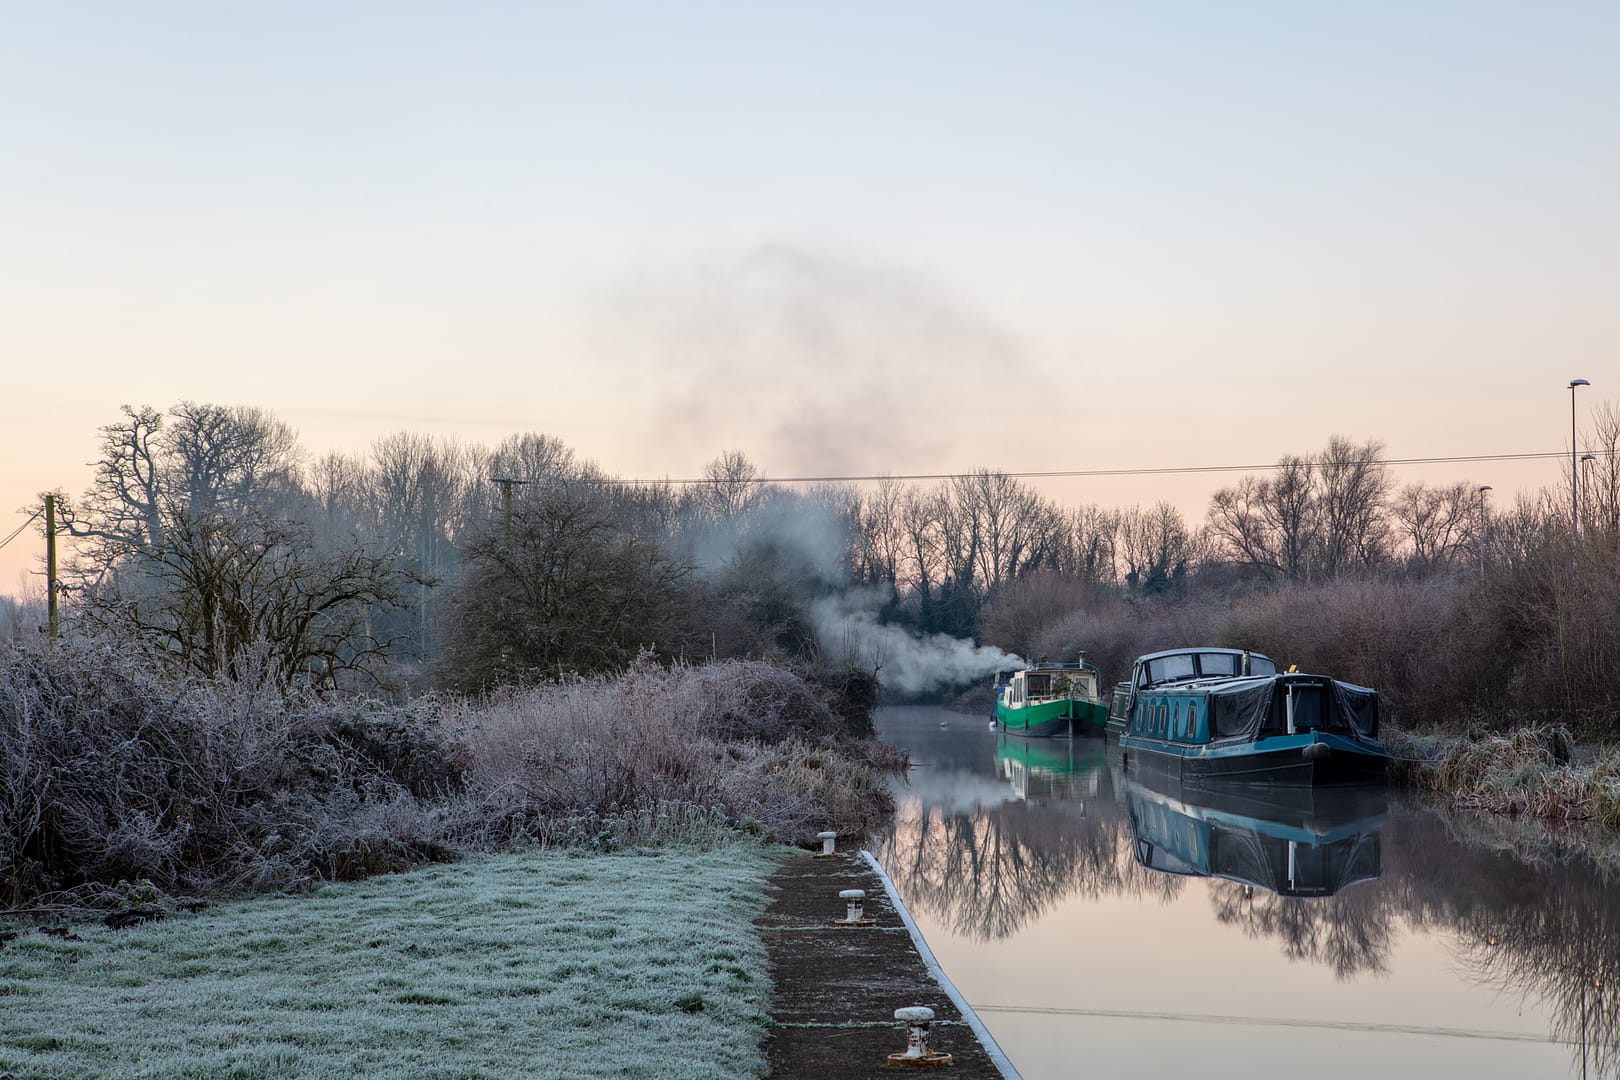 Discover 7 Landscape Photography Secrets to Elevate Your Photographs along the Kennet and Avon Canal, Aldermaston Wharf